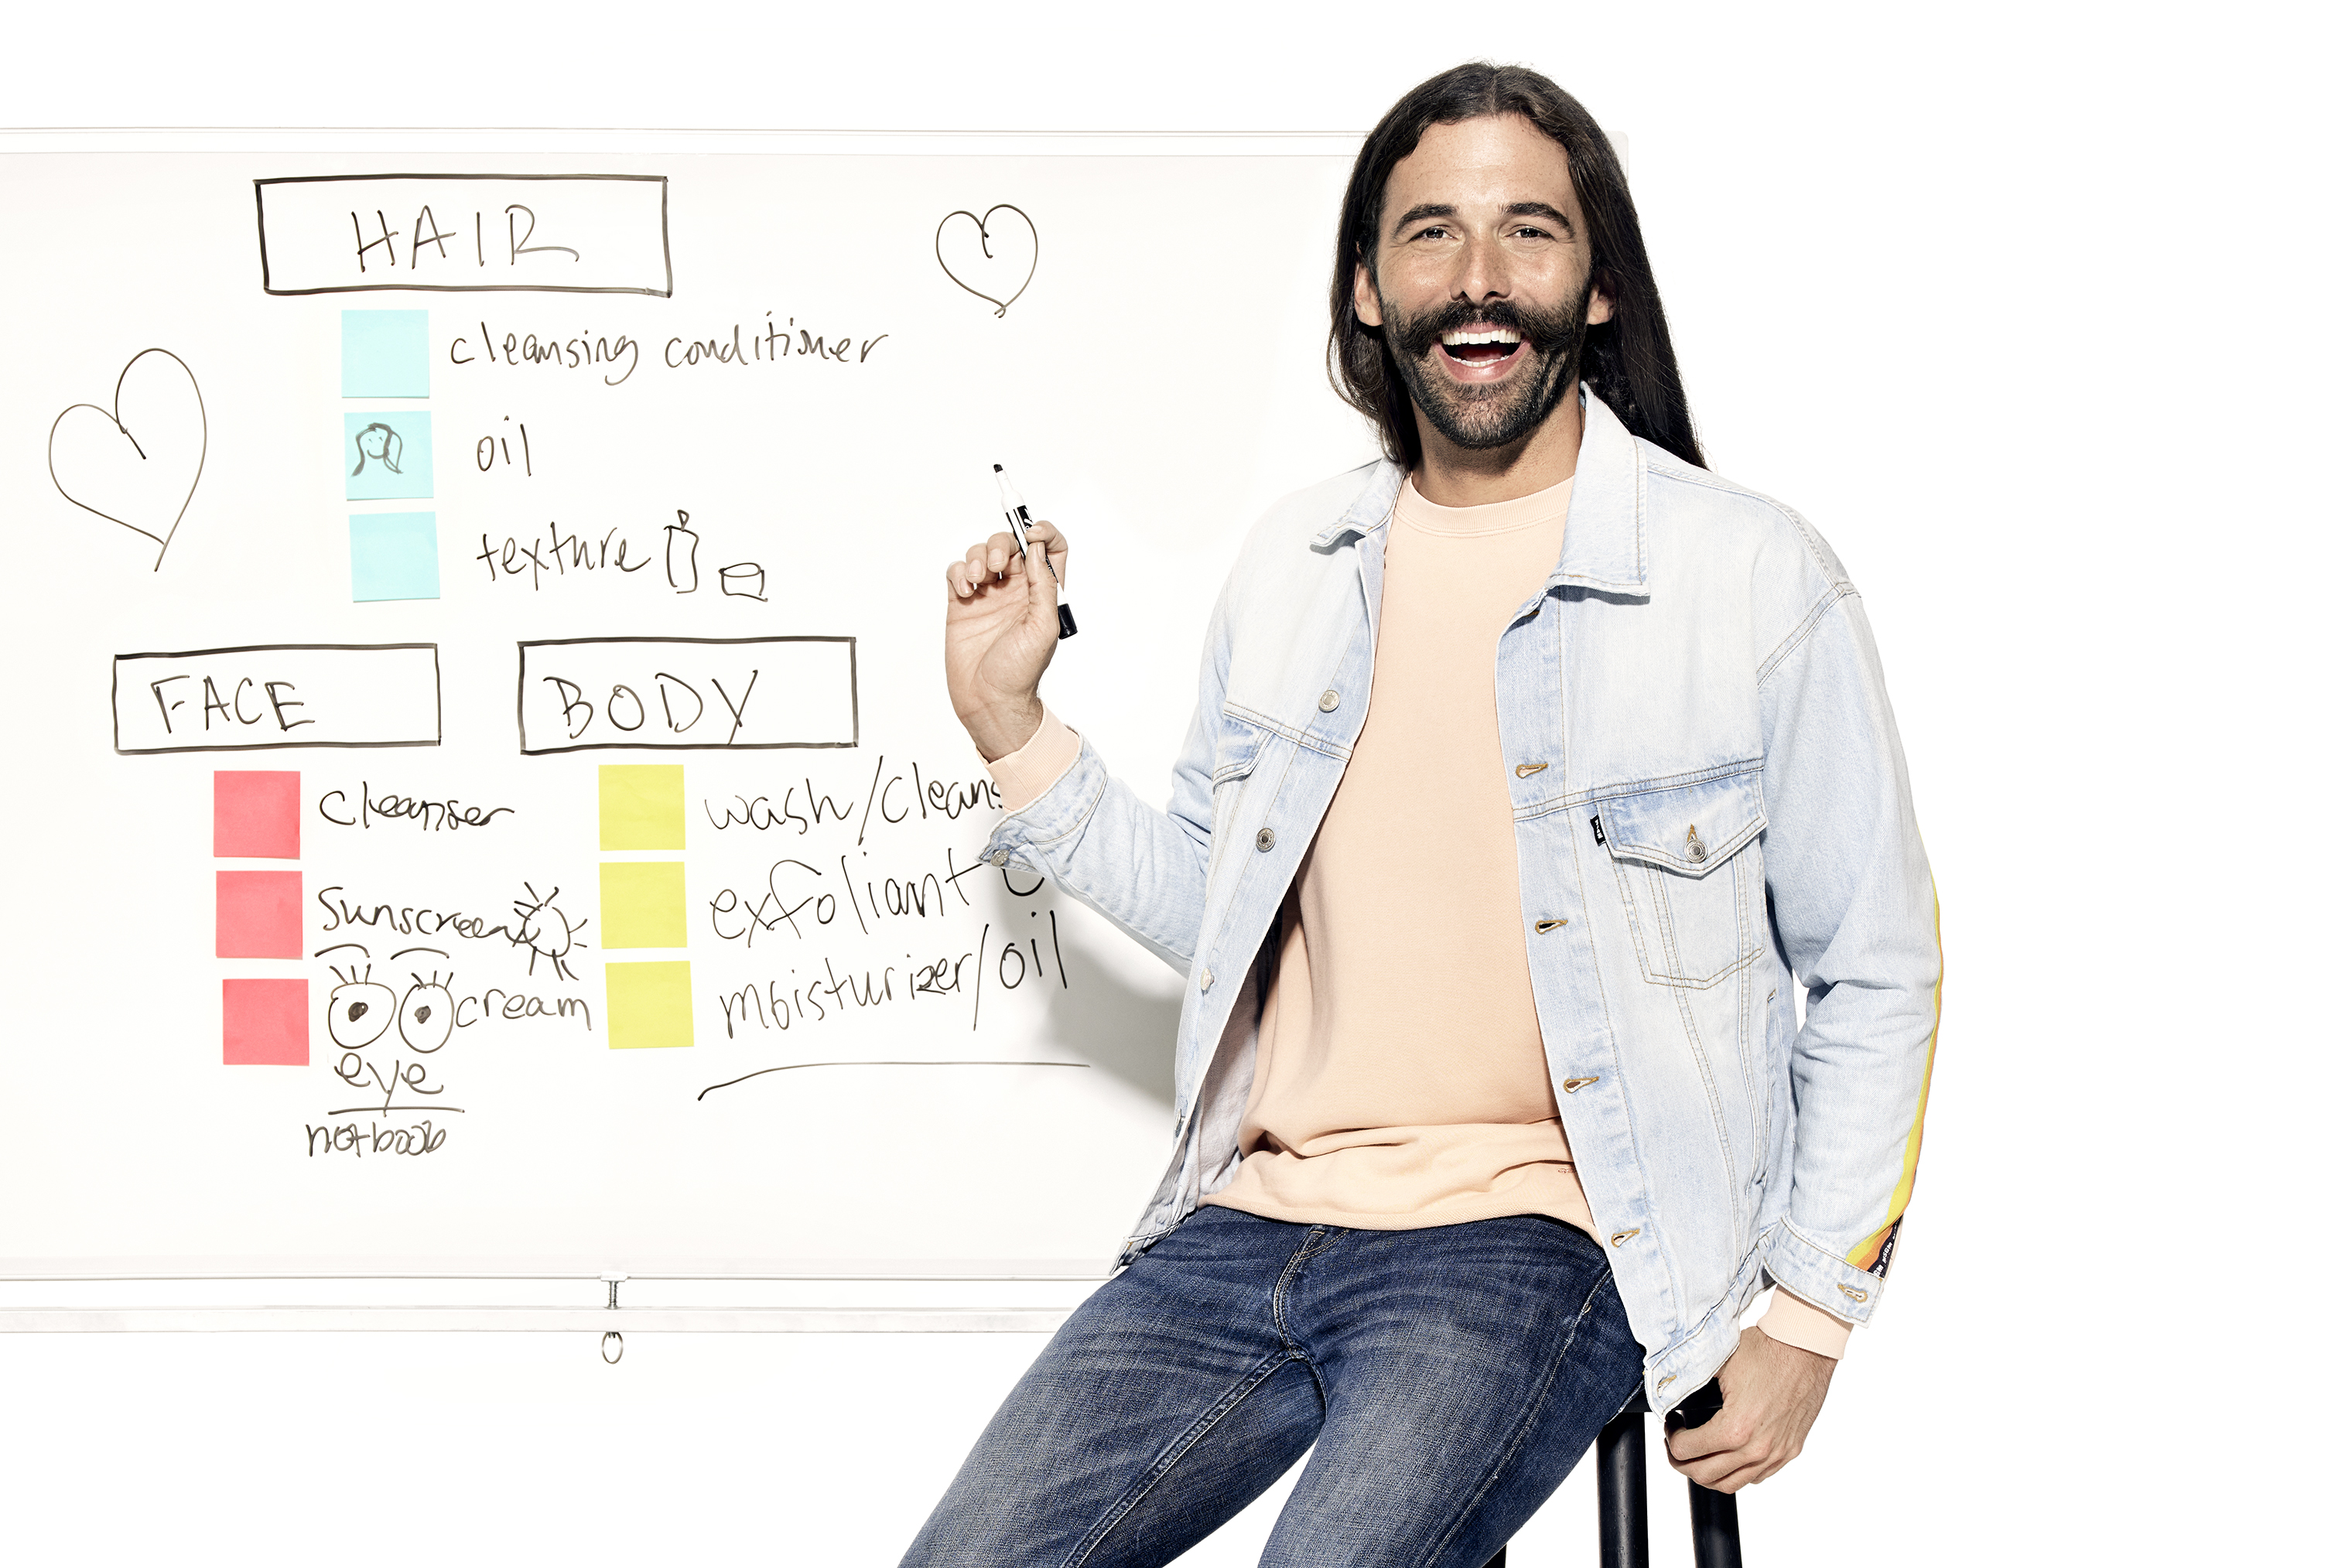 Hot ass cleaning whiteboard The Queer Eye Guide To A Richer Life Money